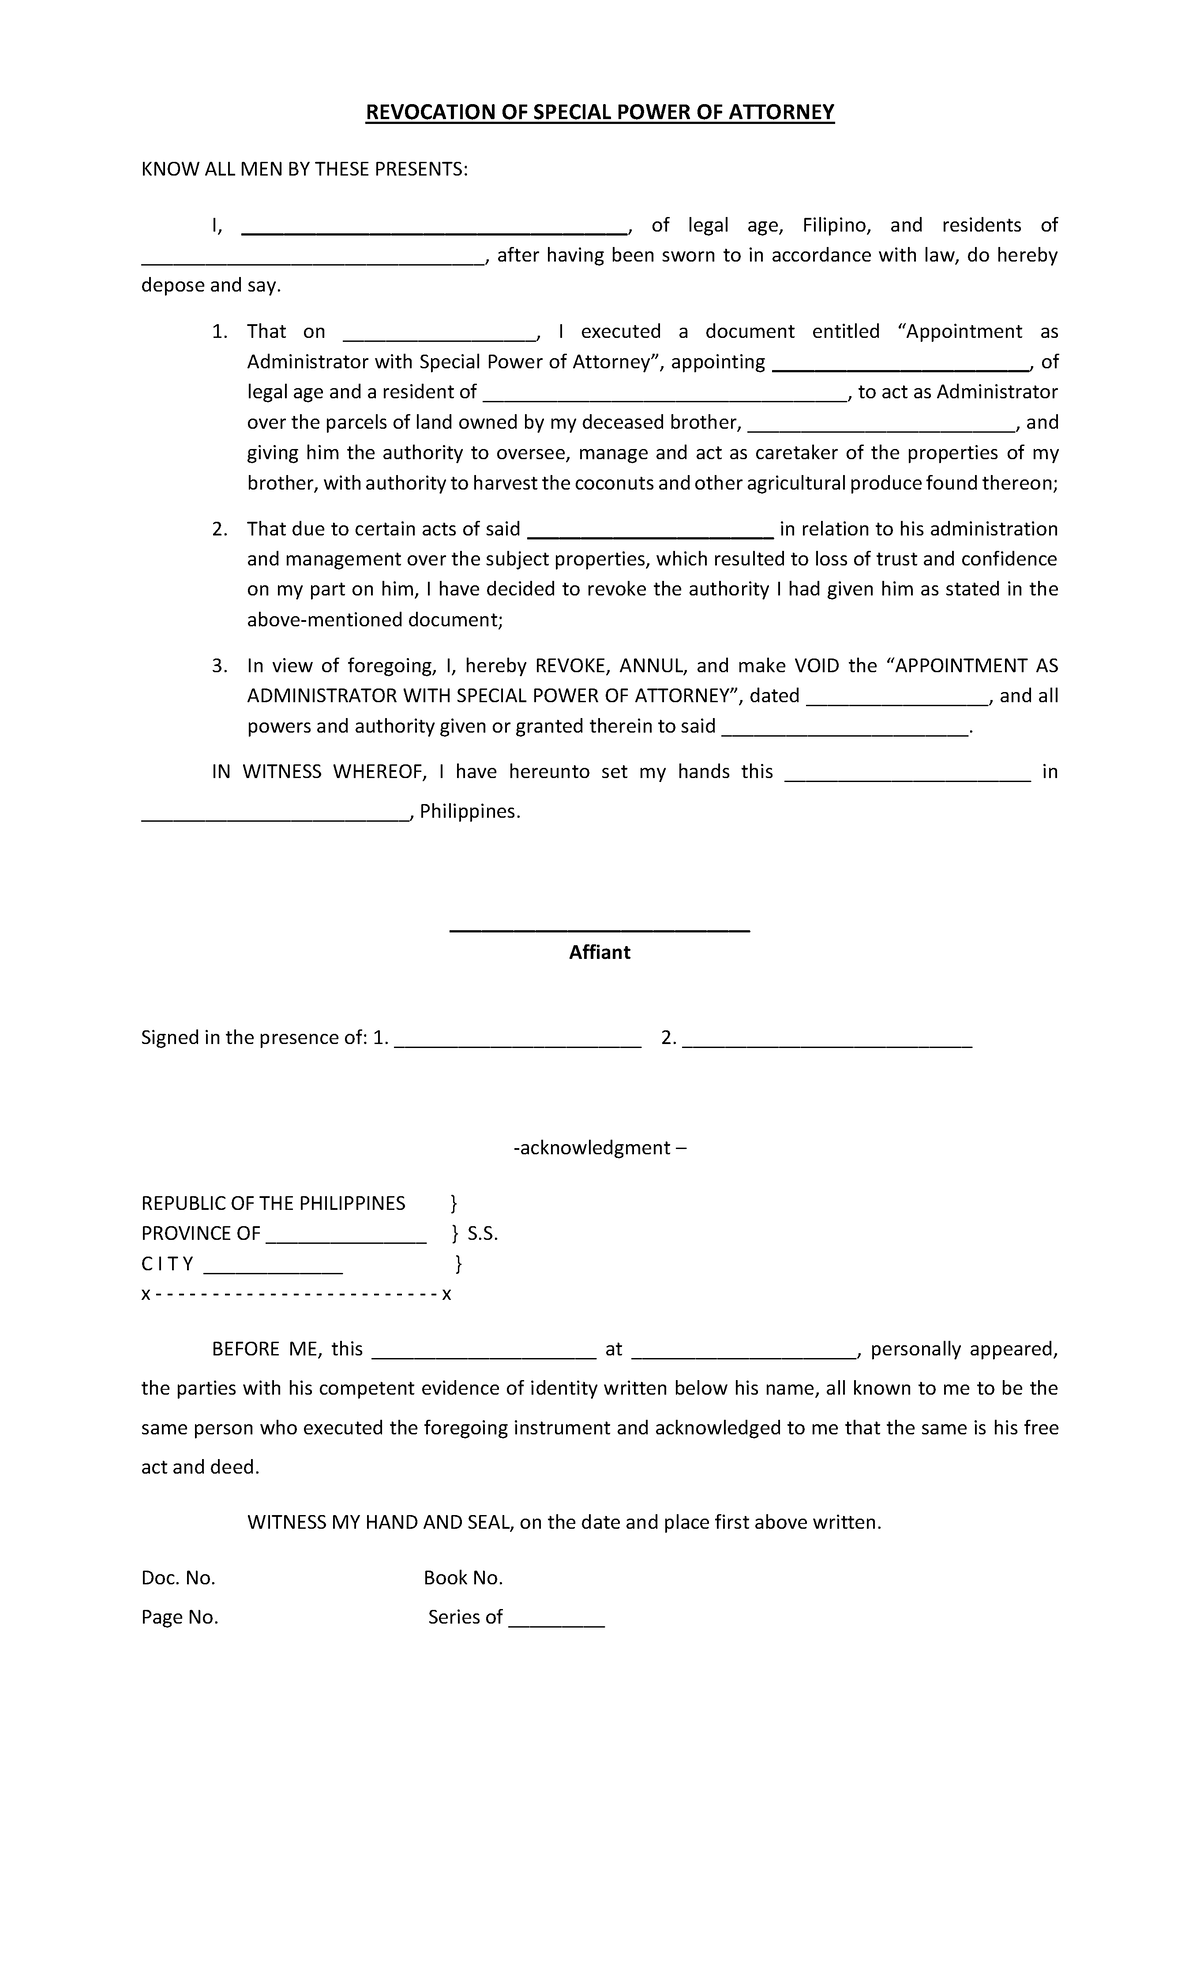 Sample Revocation Of Special Power Of Attorney Revocation Of Special Power Of Attorney Know 0177